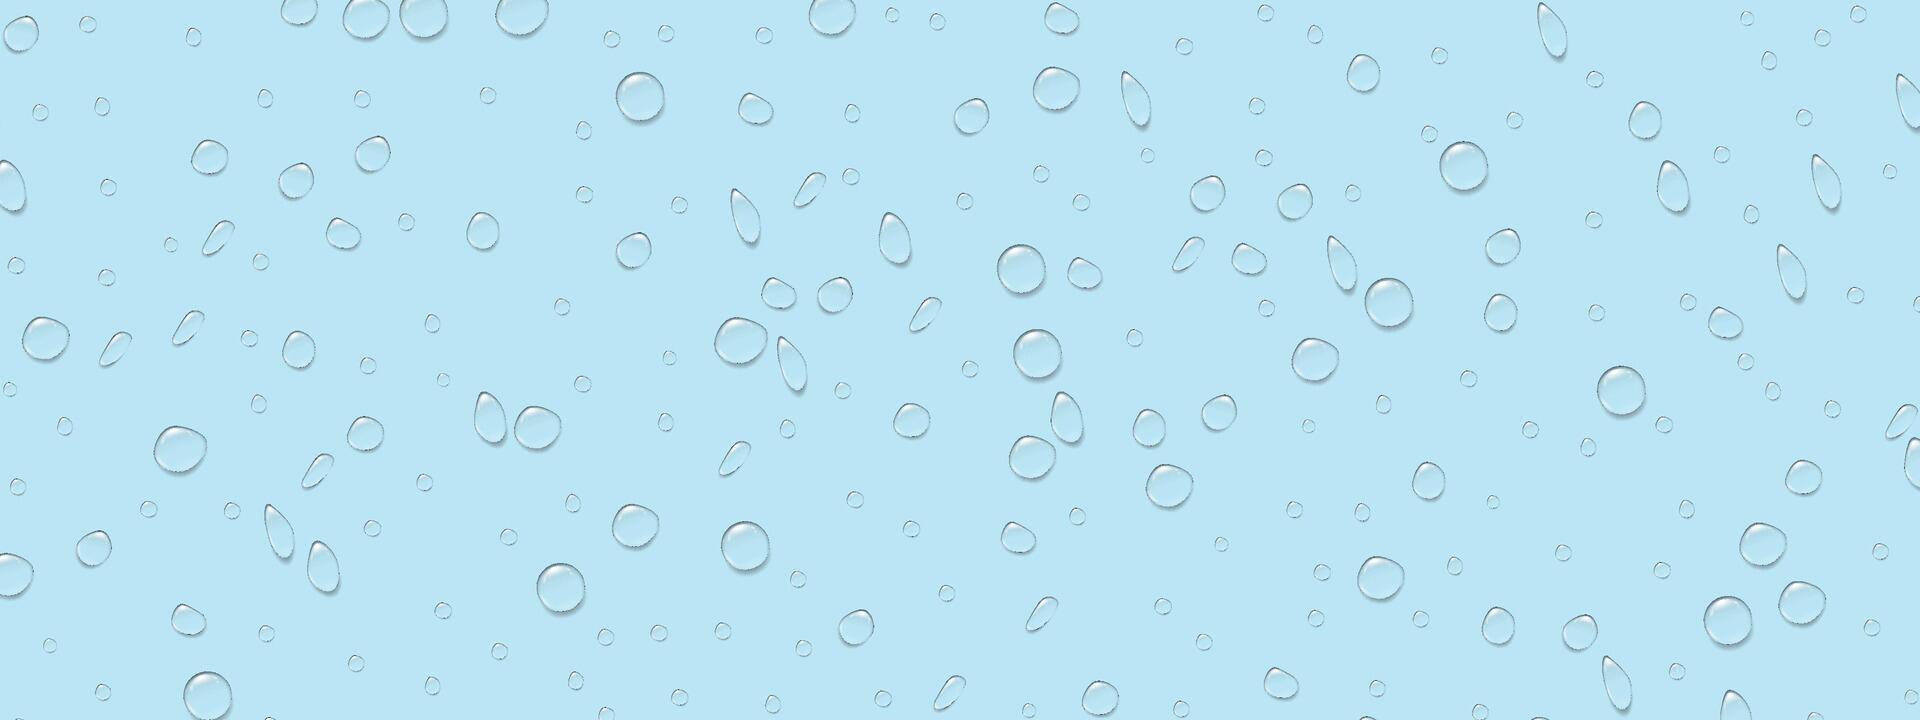 Rain splatters on the blue glass. A drop of water. Dew drops. Vector background